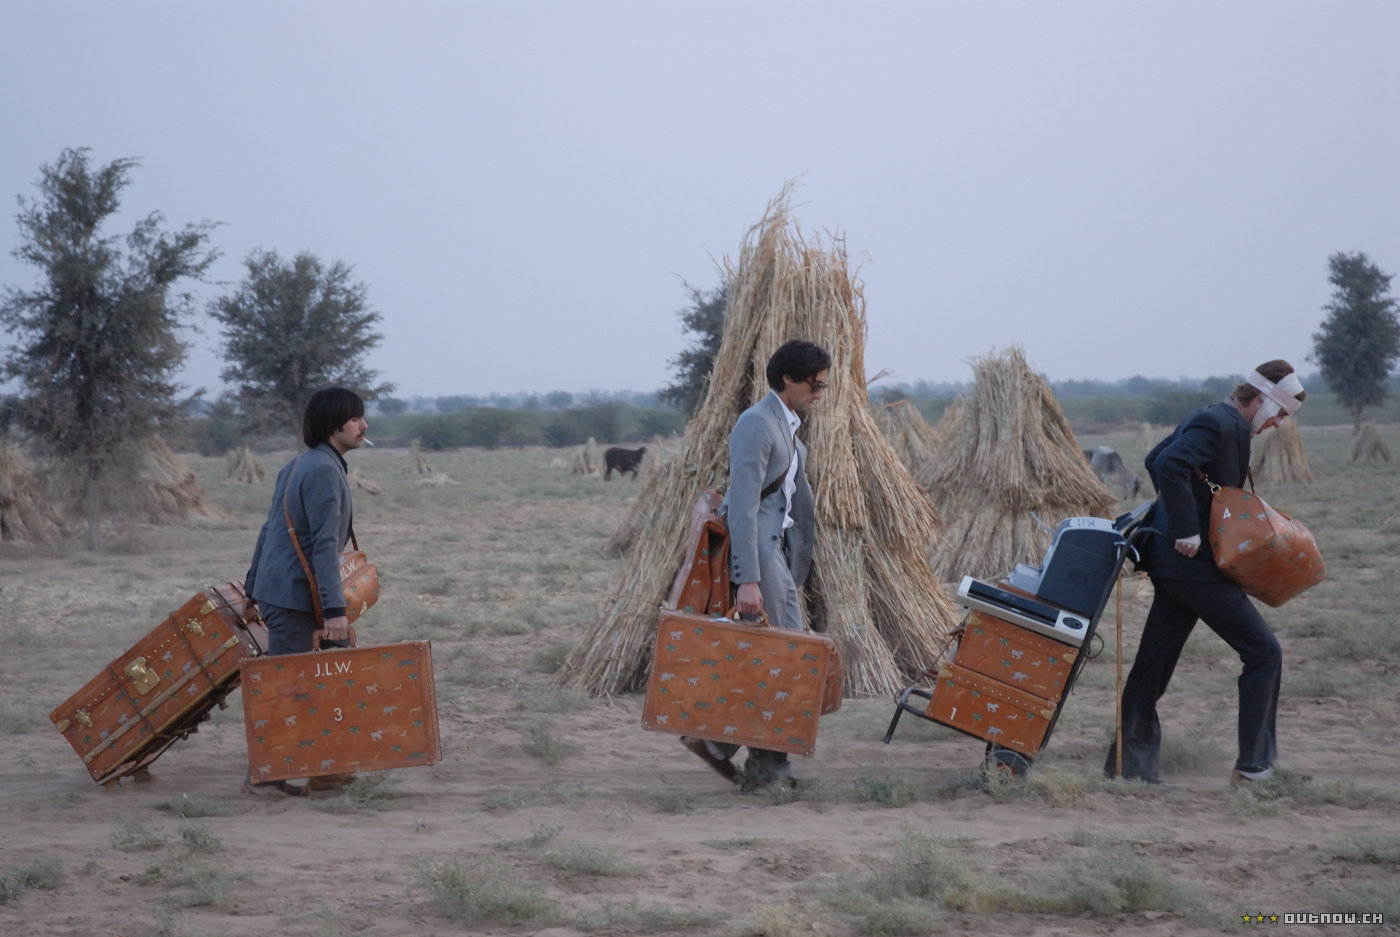 Darjeeling Limited luggage by Very Troubled Child. (Explanation in  comments) : r/wesanderson